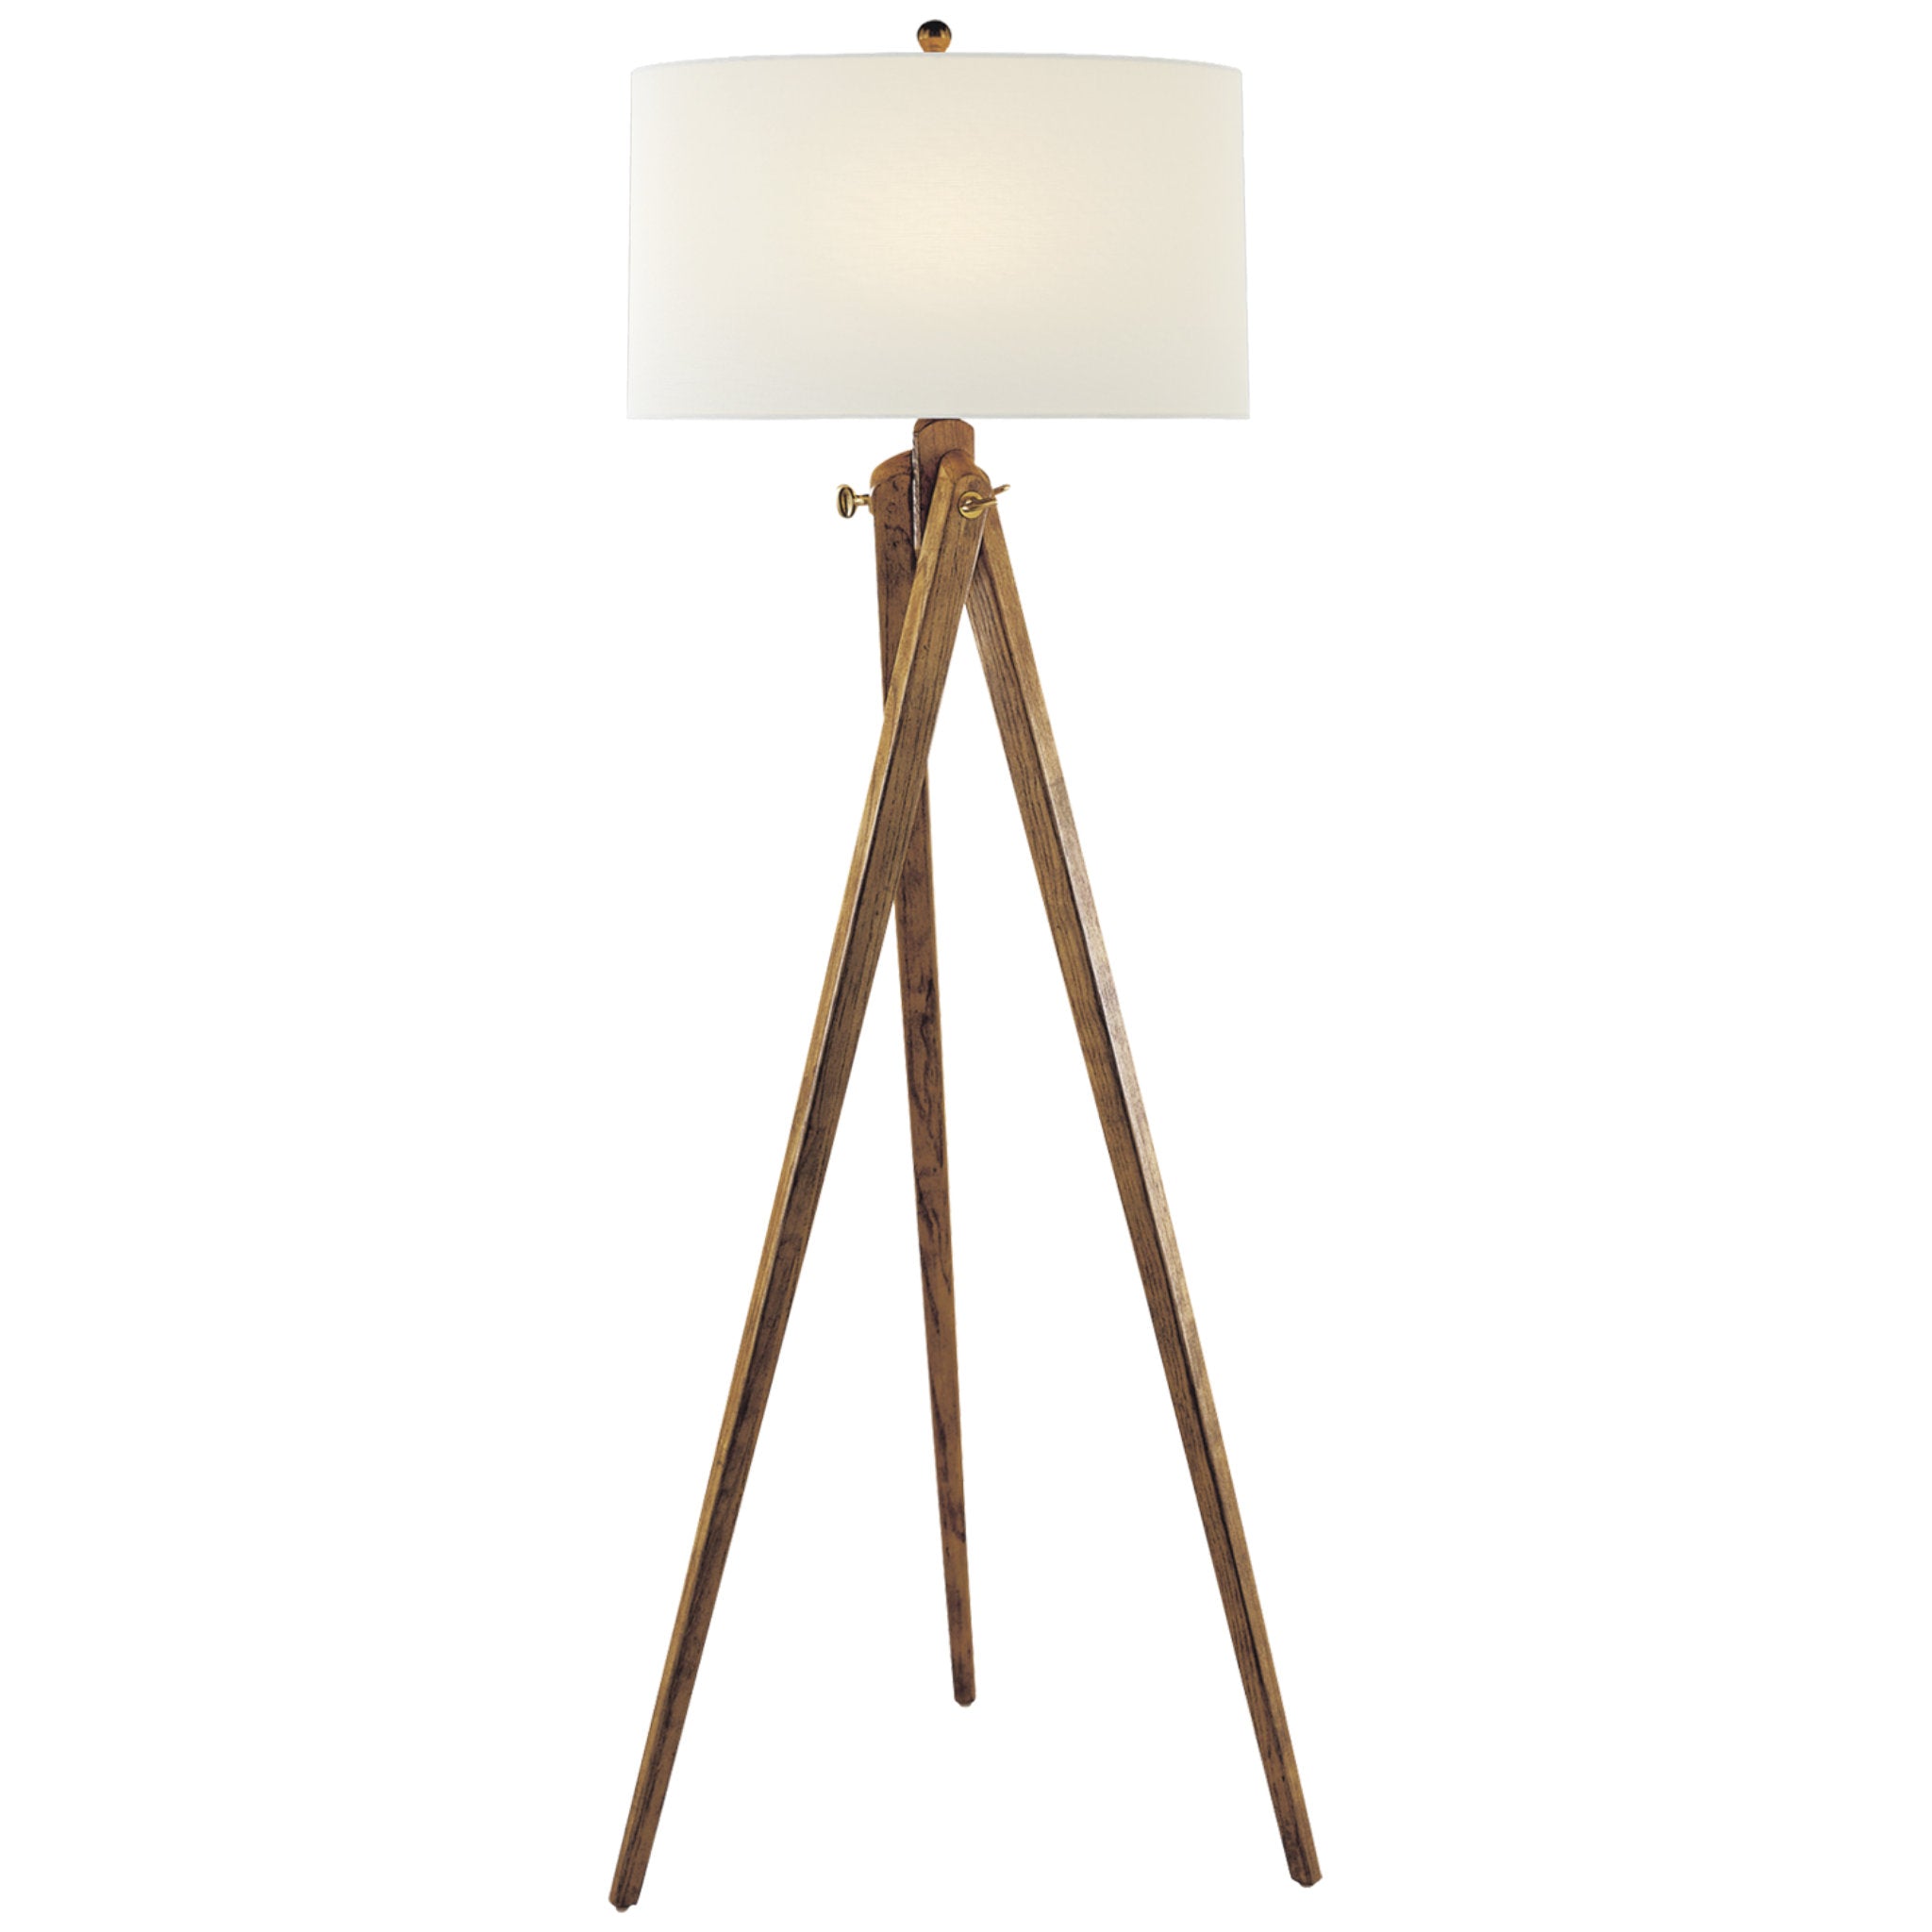 Chapman & Myers Tripod Floor Lamp in French Wax with Linen Shade